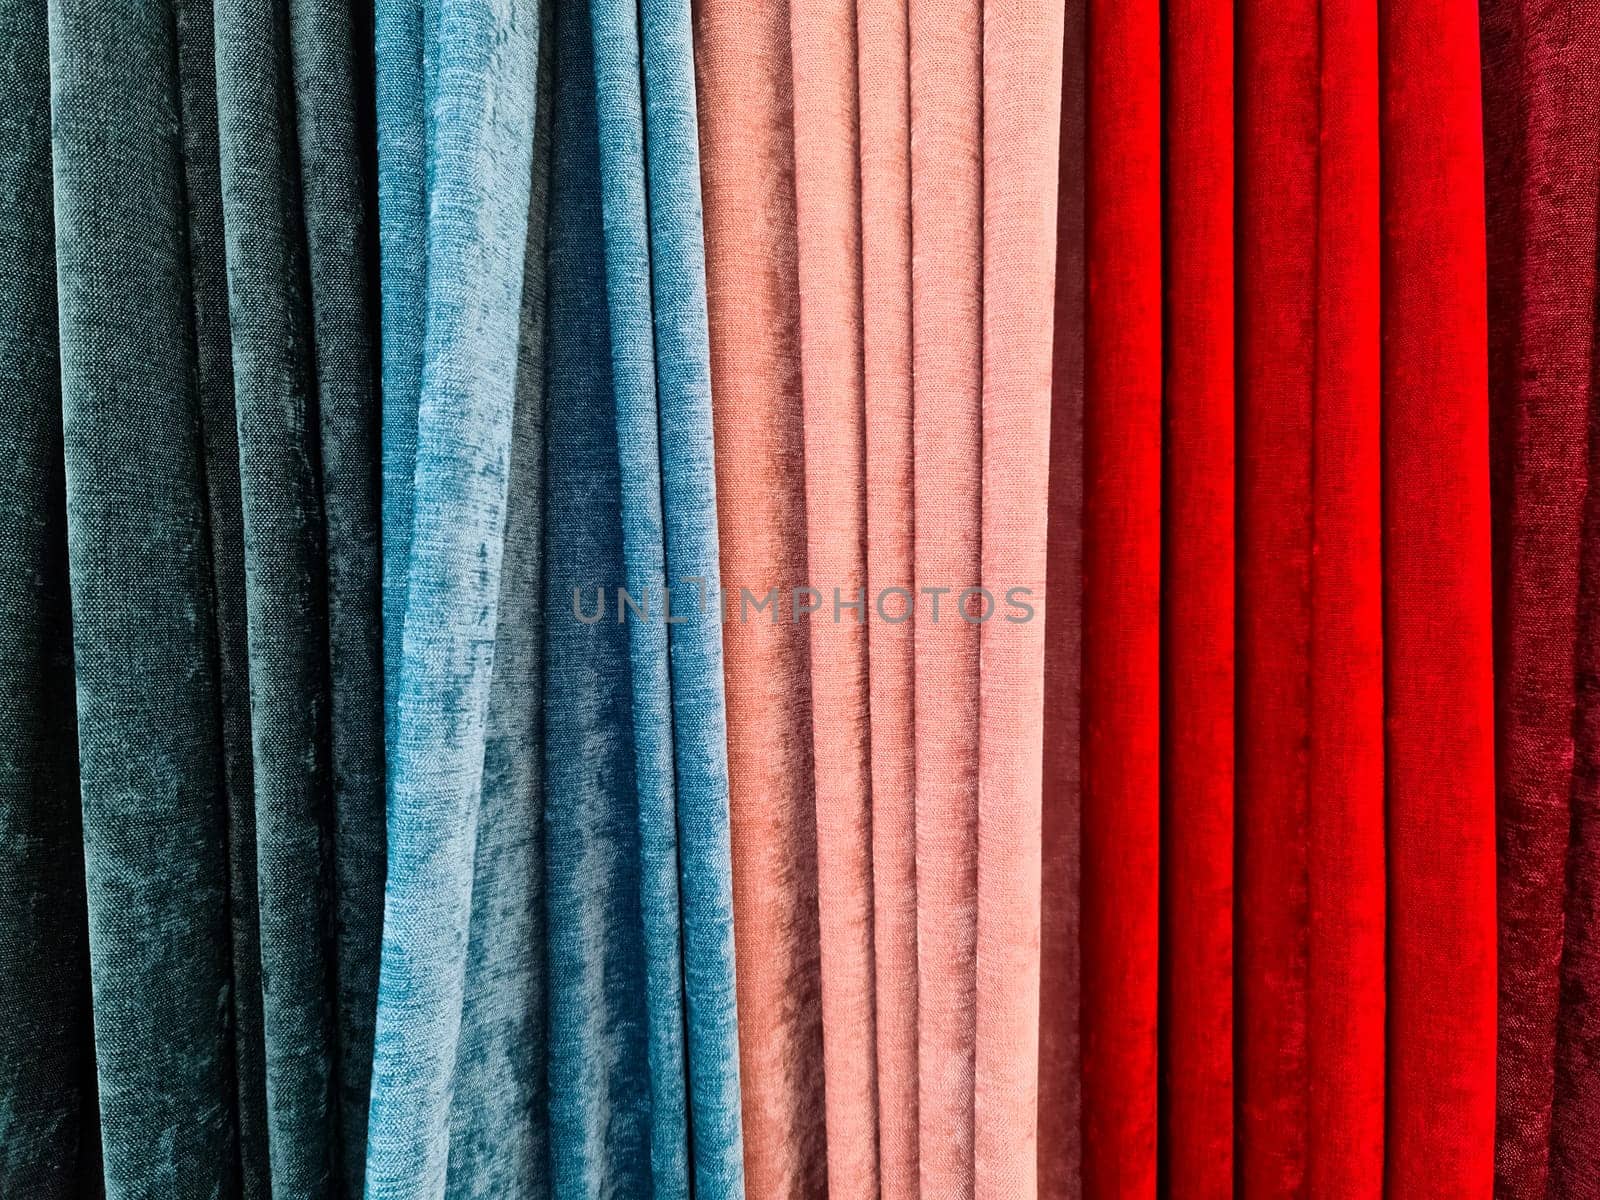 Samples of cloth and fabrics in different colors at a fabrics market by MP_foto71